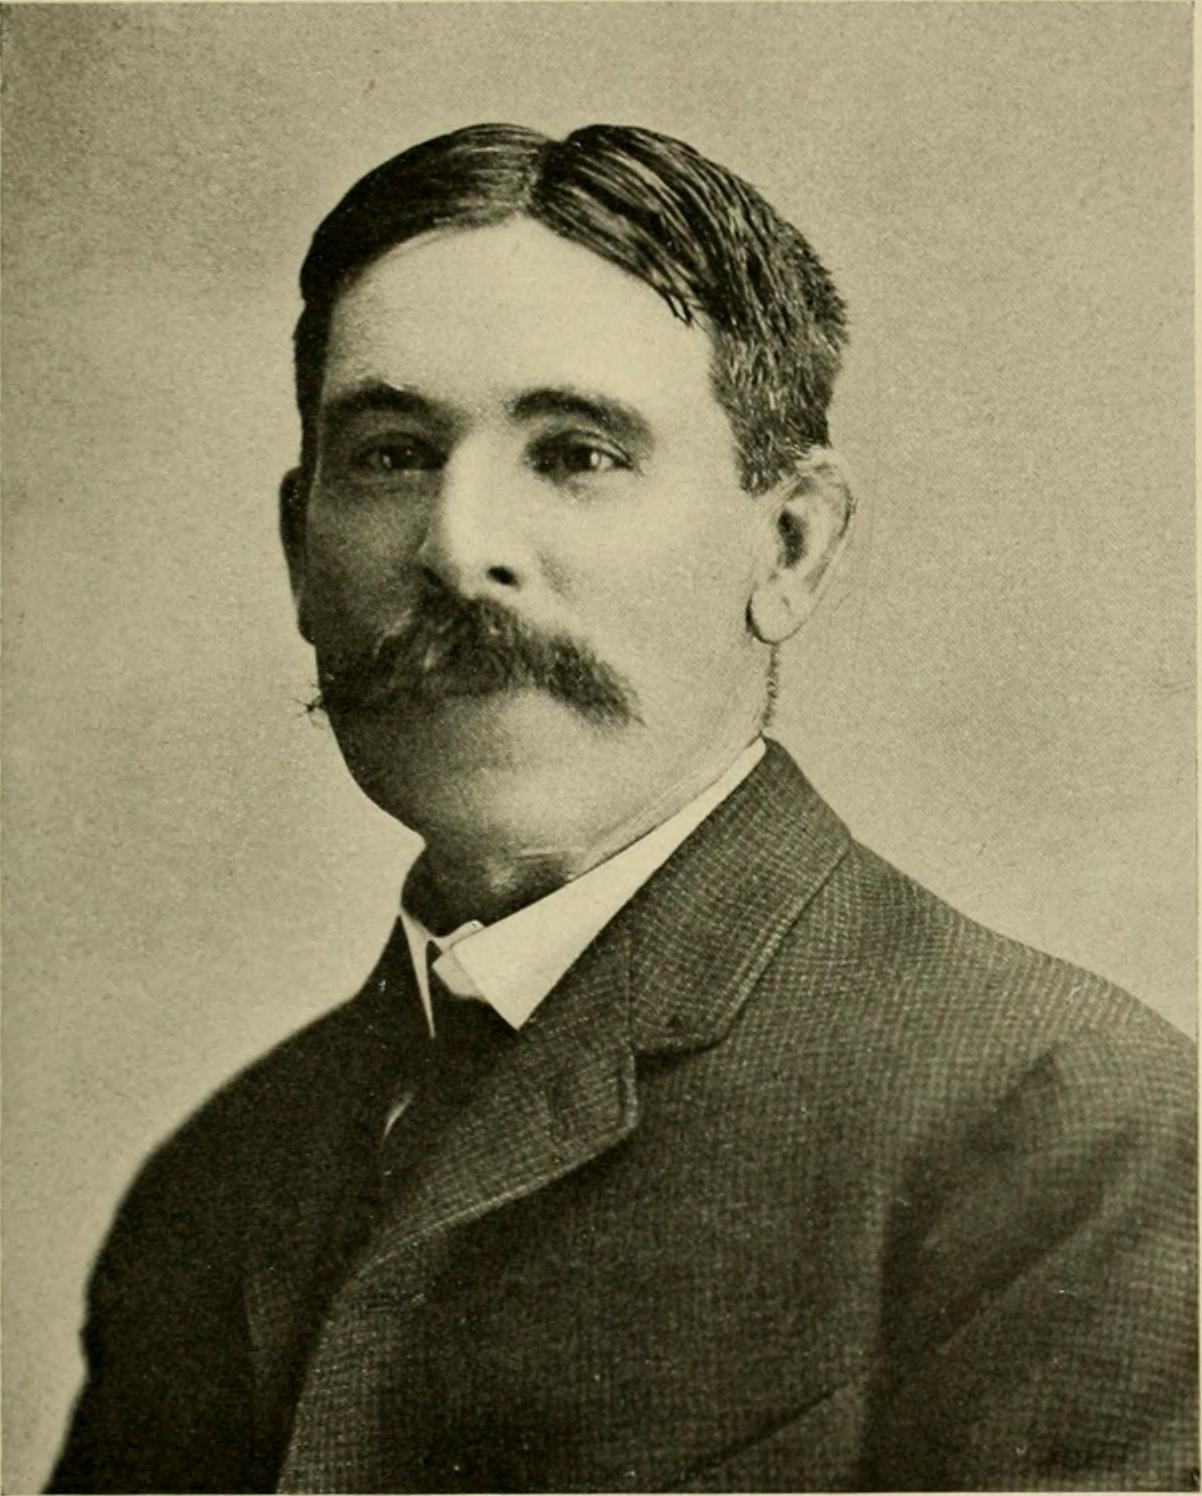 Image from page 254 of "The New Jersey coast in three centuries: history of the New Jersey coast with genealogical and historic-biographical appendix" (1902)